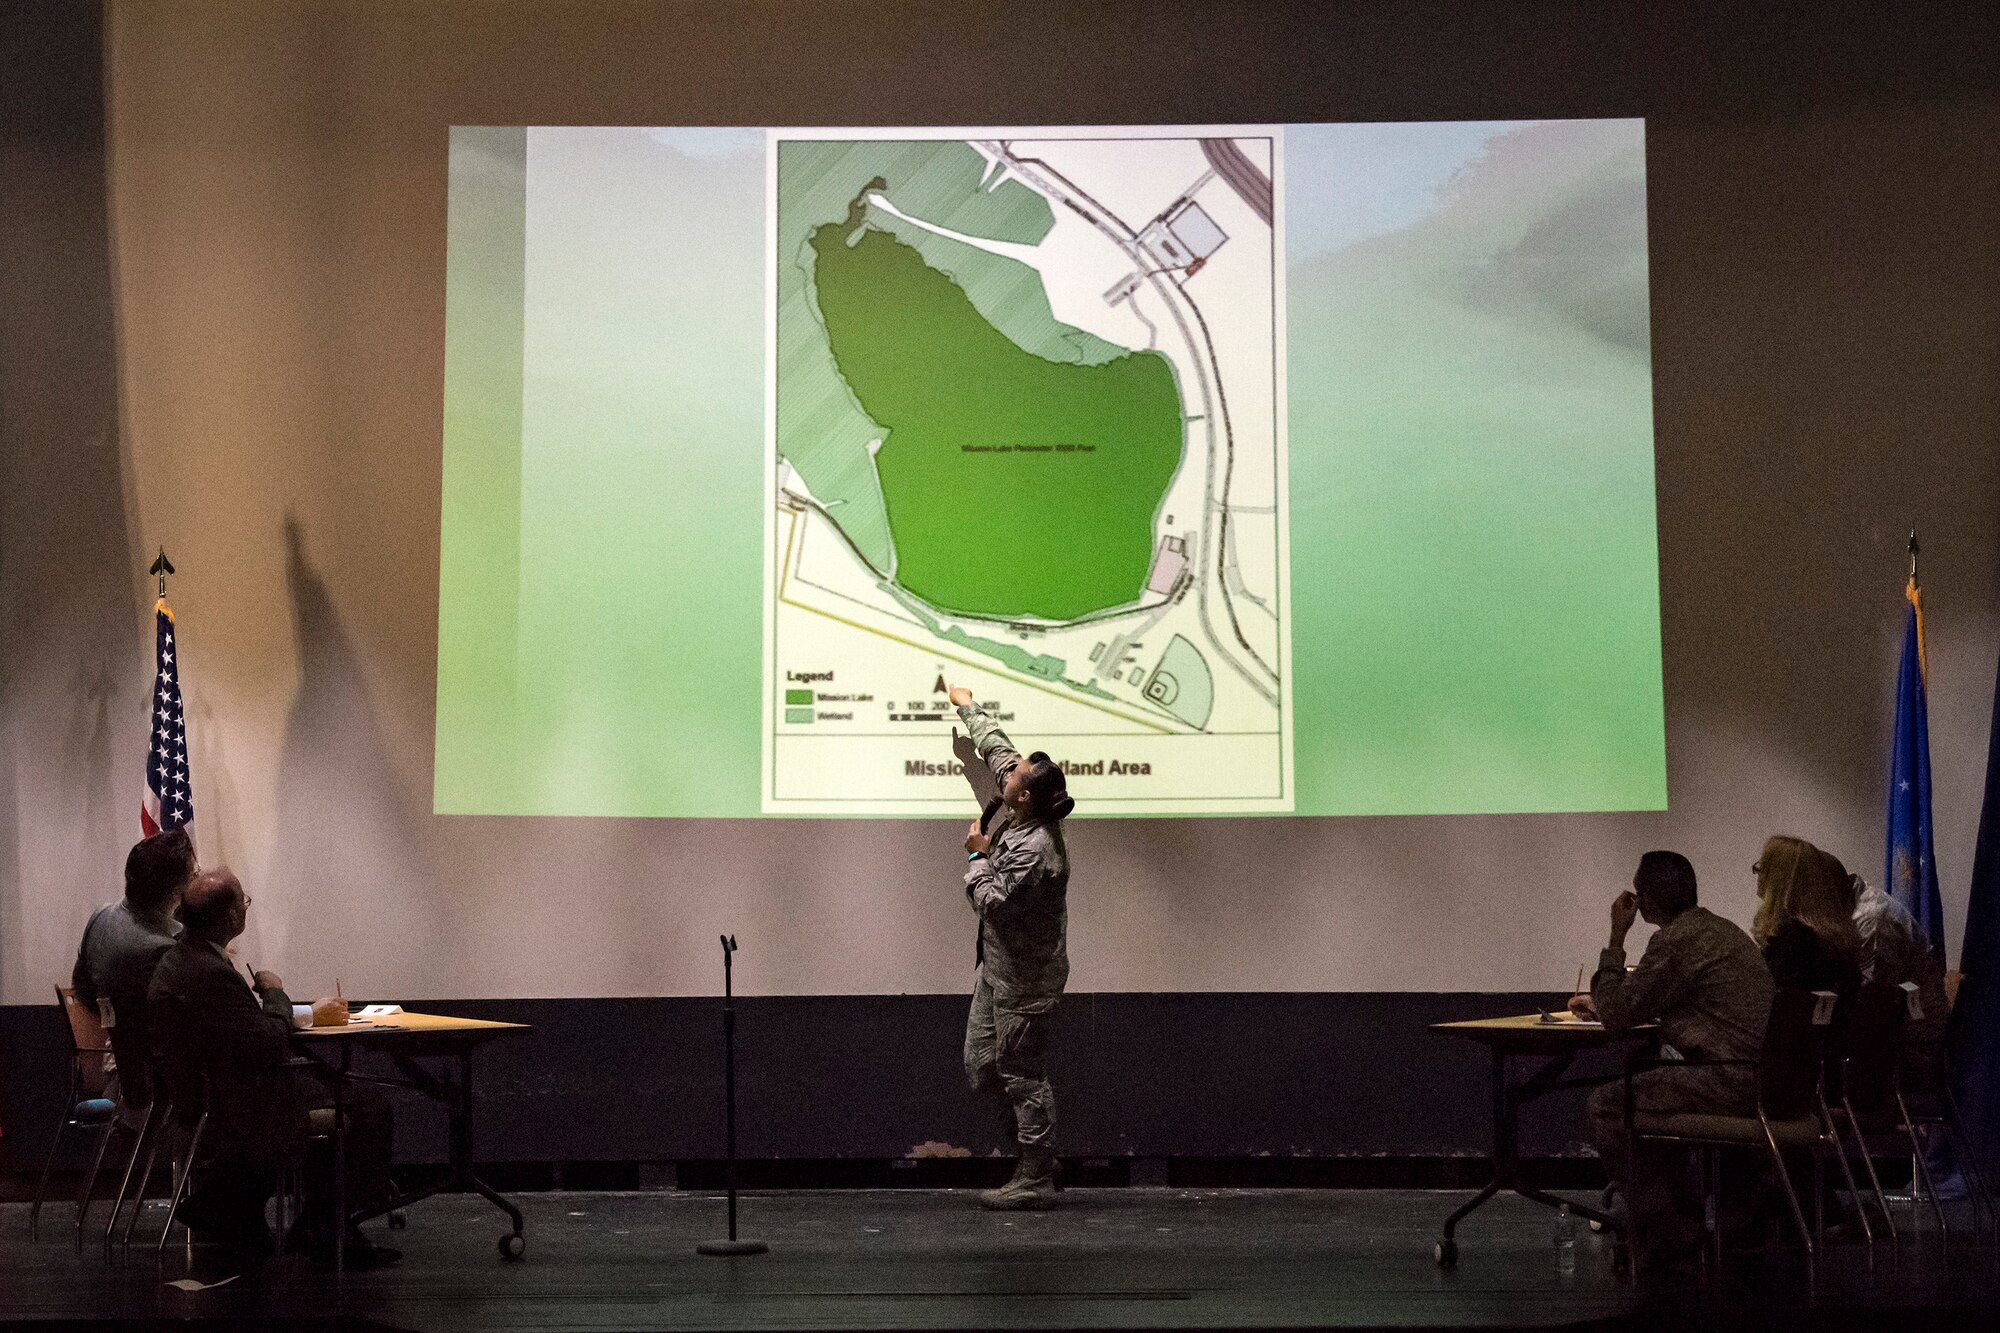 Staff Sgt. Samantha Hampton, center, 23d Mission Support Group command staff administrator, gives a presentation during Spark Tank, June 15, 2018, at Moody Air Force Base, Ga. Spark Tank, a spinoff of the show Shark Tank, gave Airmen the opportunity to propose projects and improvements for Moody to leaders from the 23d WG and the local community. (U.S. Air Force photo by Airman 1st Class Eugene Oliver)